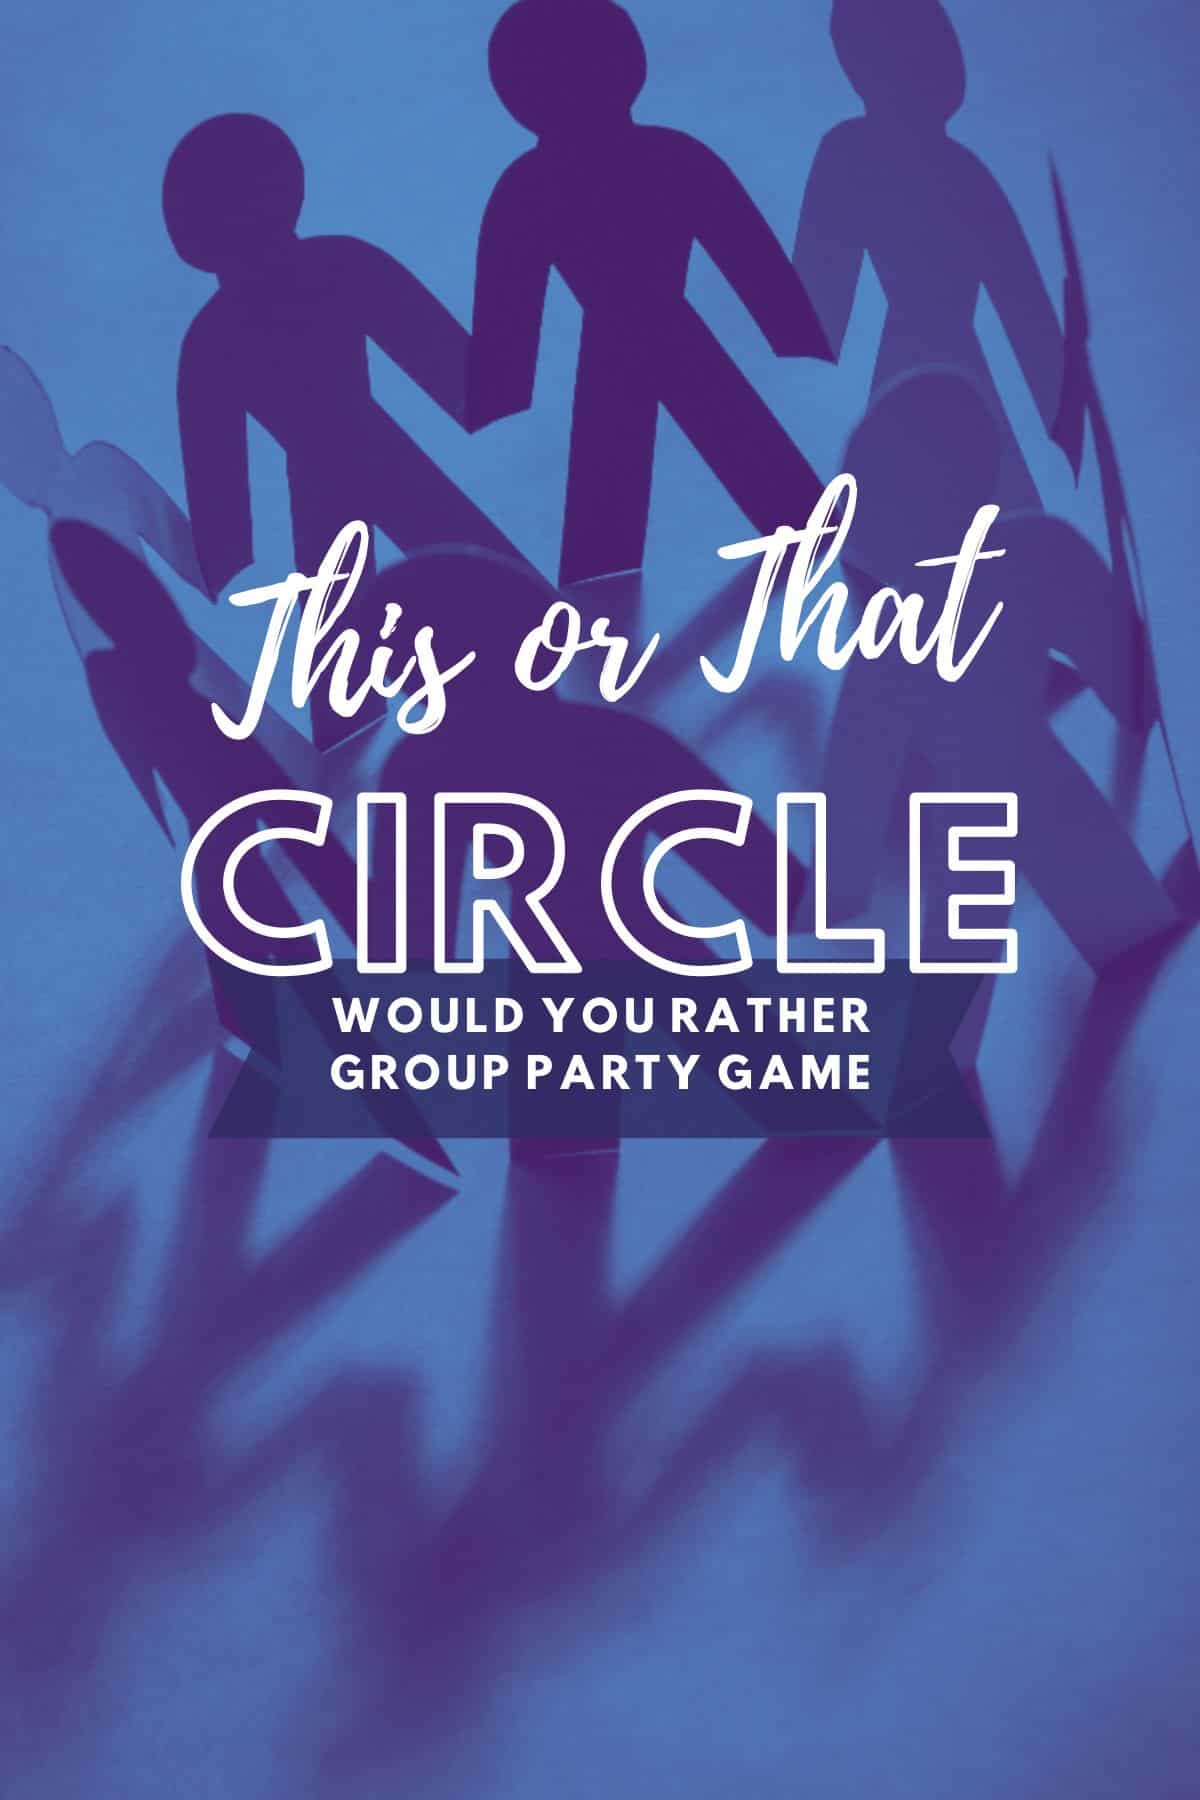 Paper people in a circle playing a Would You Rather group party game with the title This or That Circle written on top.